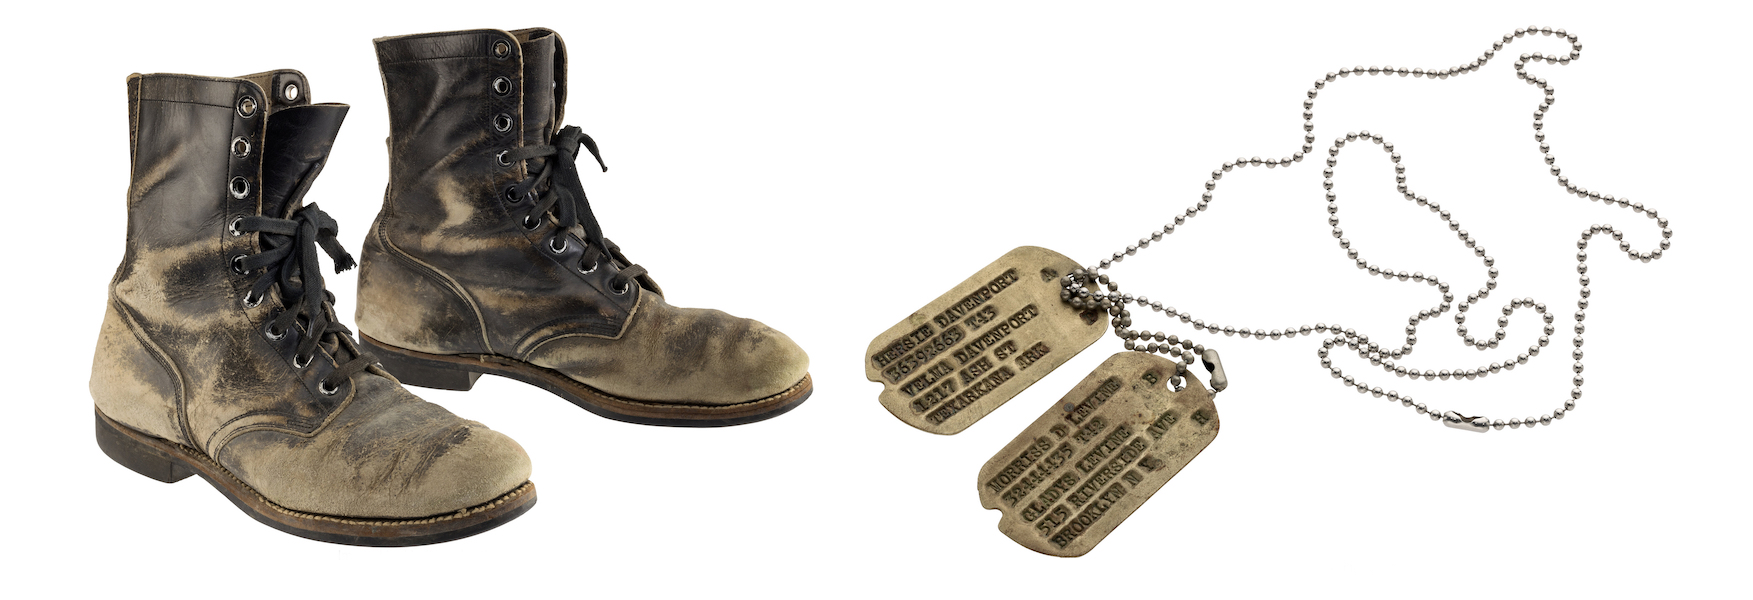 The combat boots and dog tags Alan Alda wore while playing Hawkeye Pierce during the 11-season run of the television show ‘MASH’ sold for $125,000 on July 28. Images courtesy of Heritage Auctions